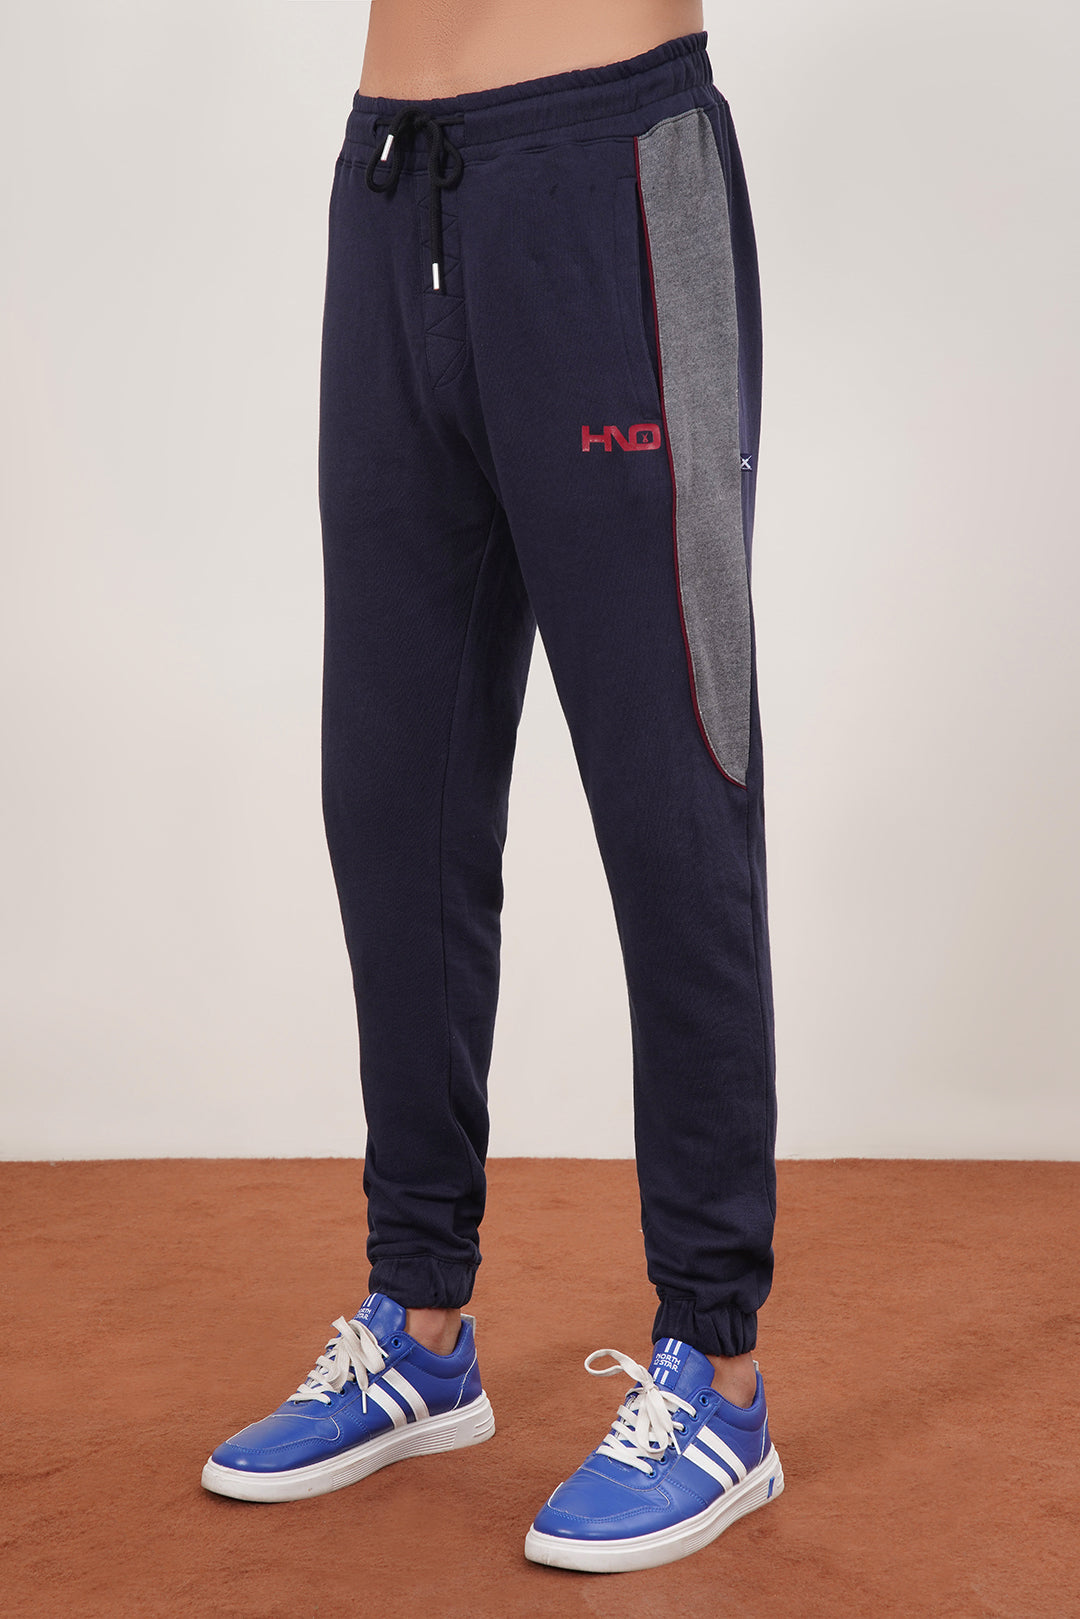 Men's Navy Trouser With Grey Side Panels